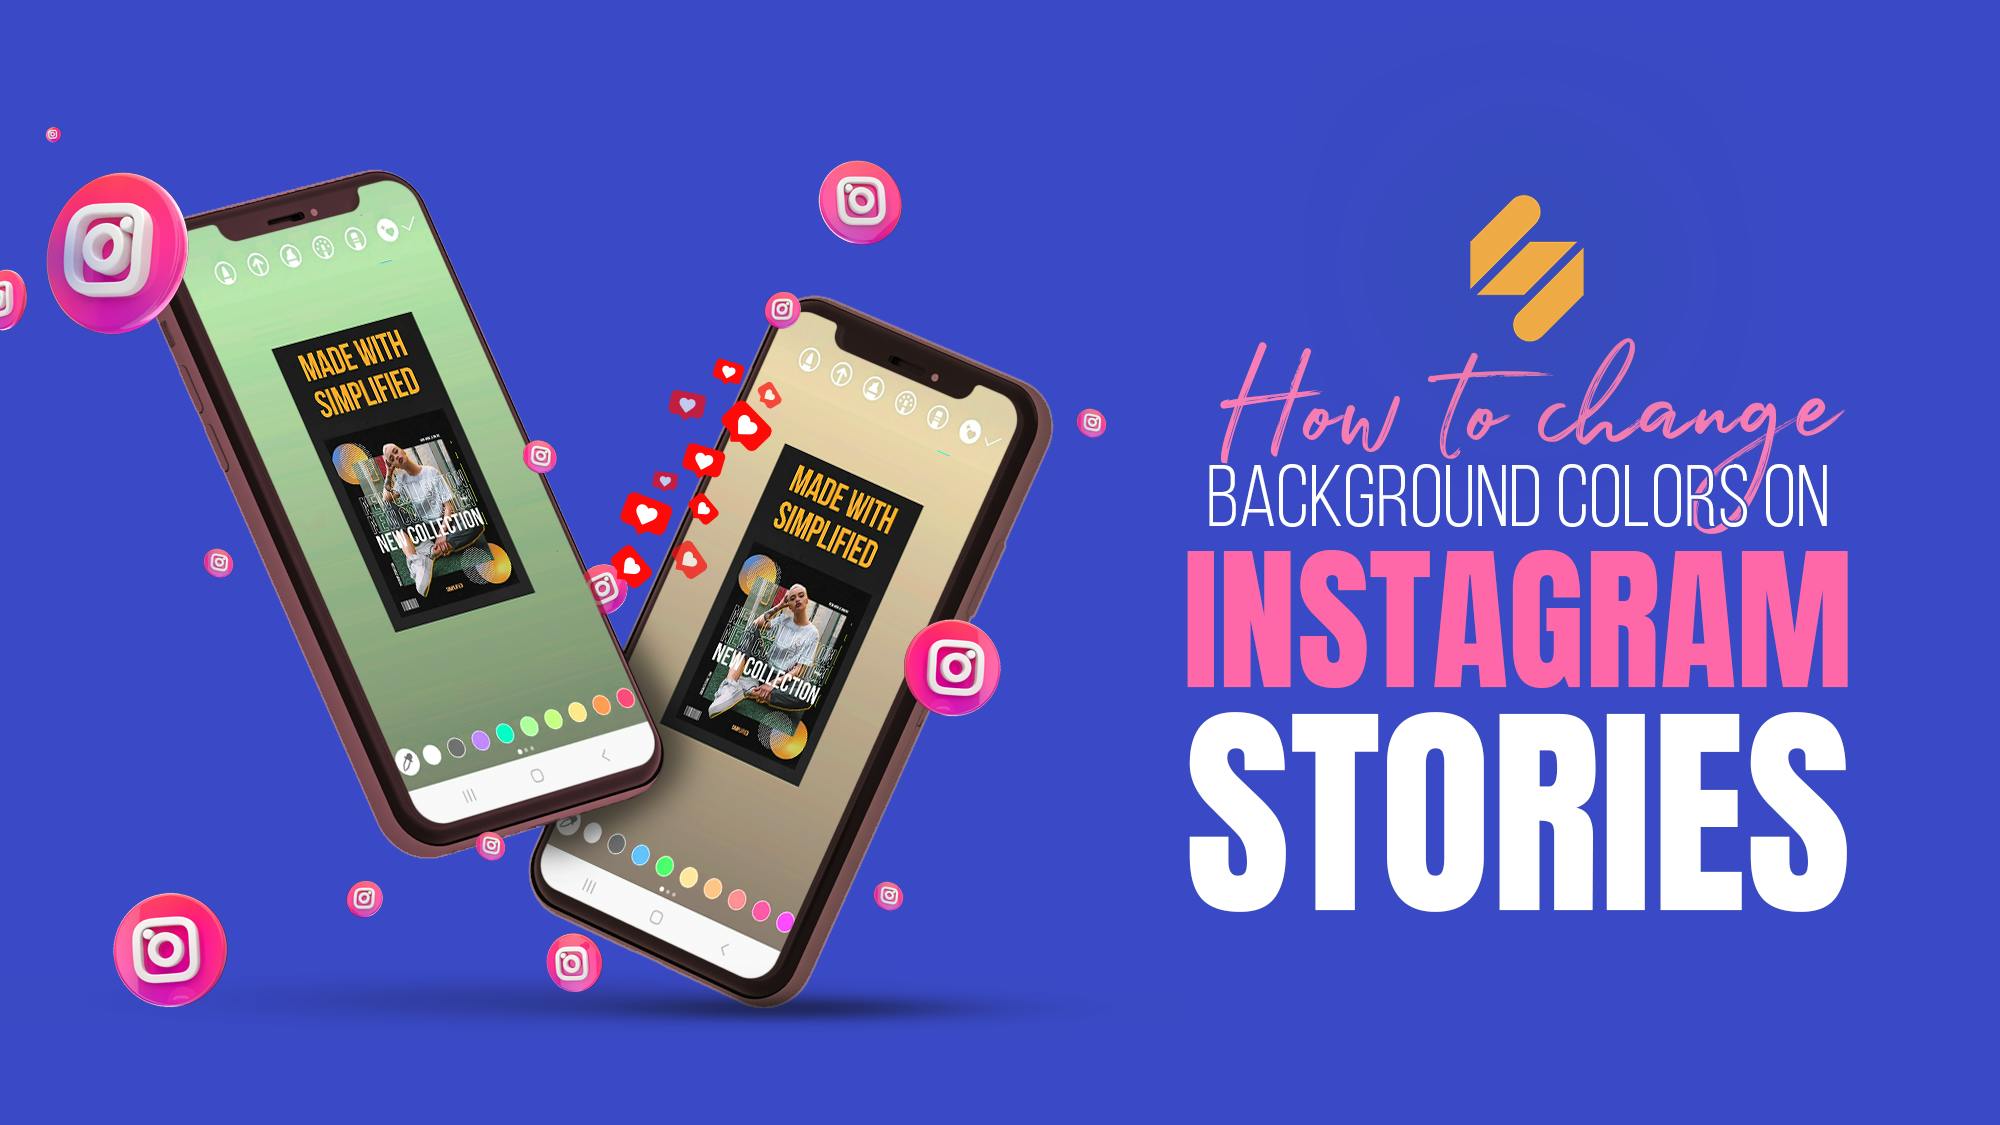 How to Change Background Colors on Instagram Stories